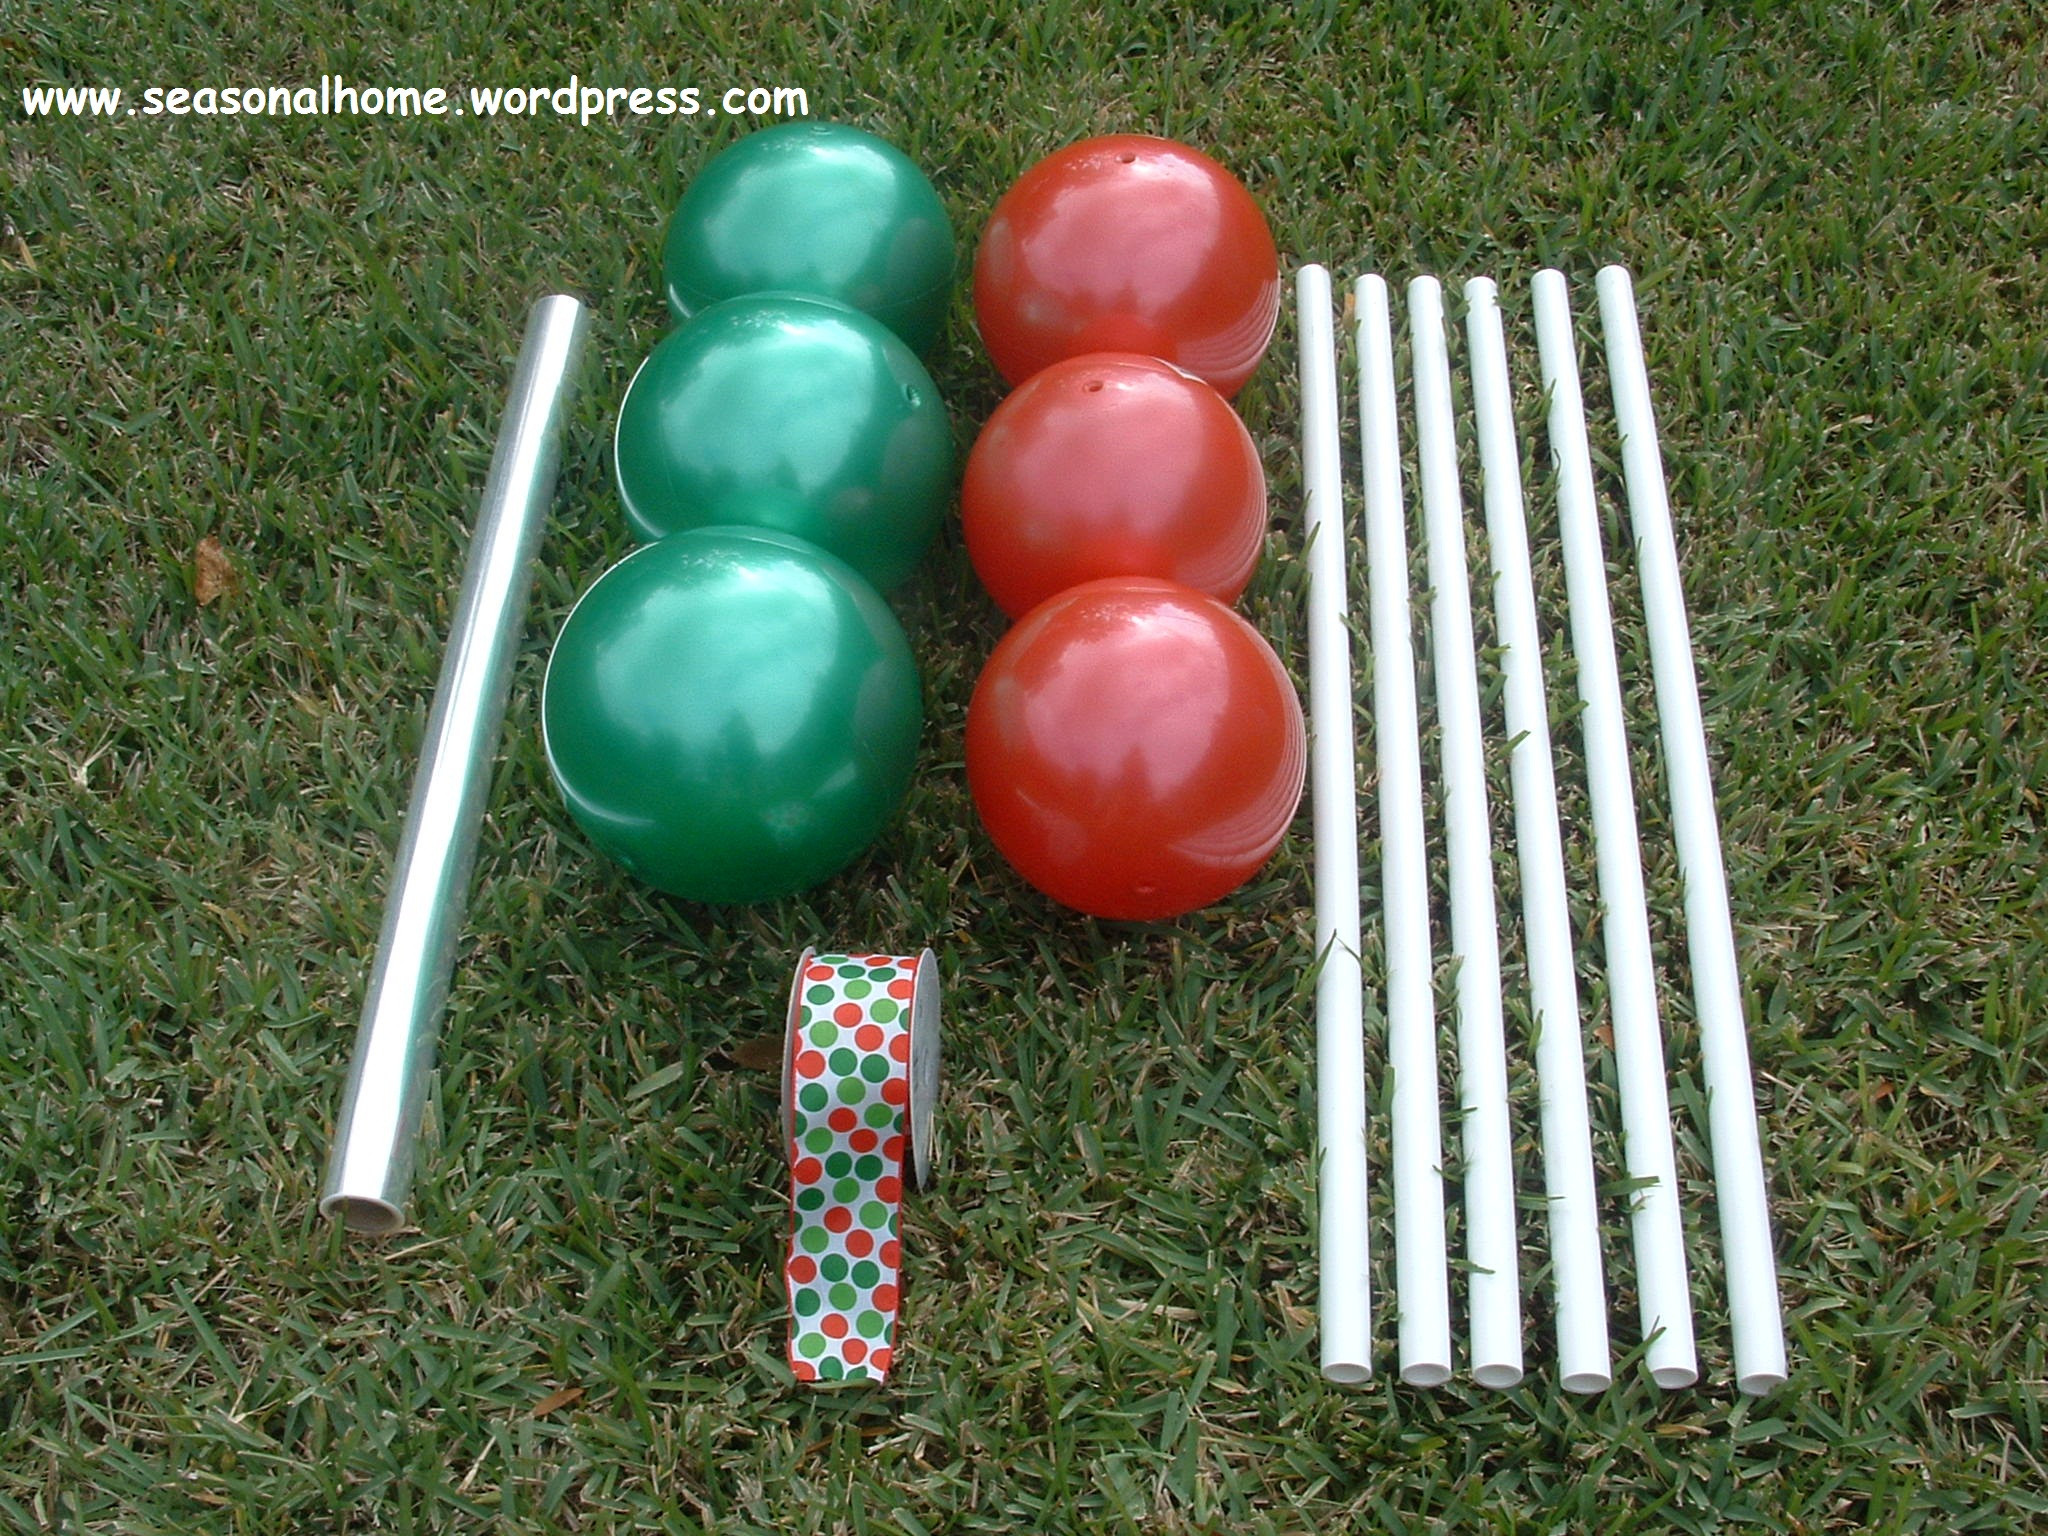 DIY Outdoor Christmas Candy Decorations
 Outdoor “CANDY” A Christmas Decorating Idea The